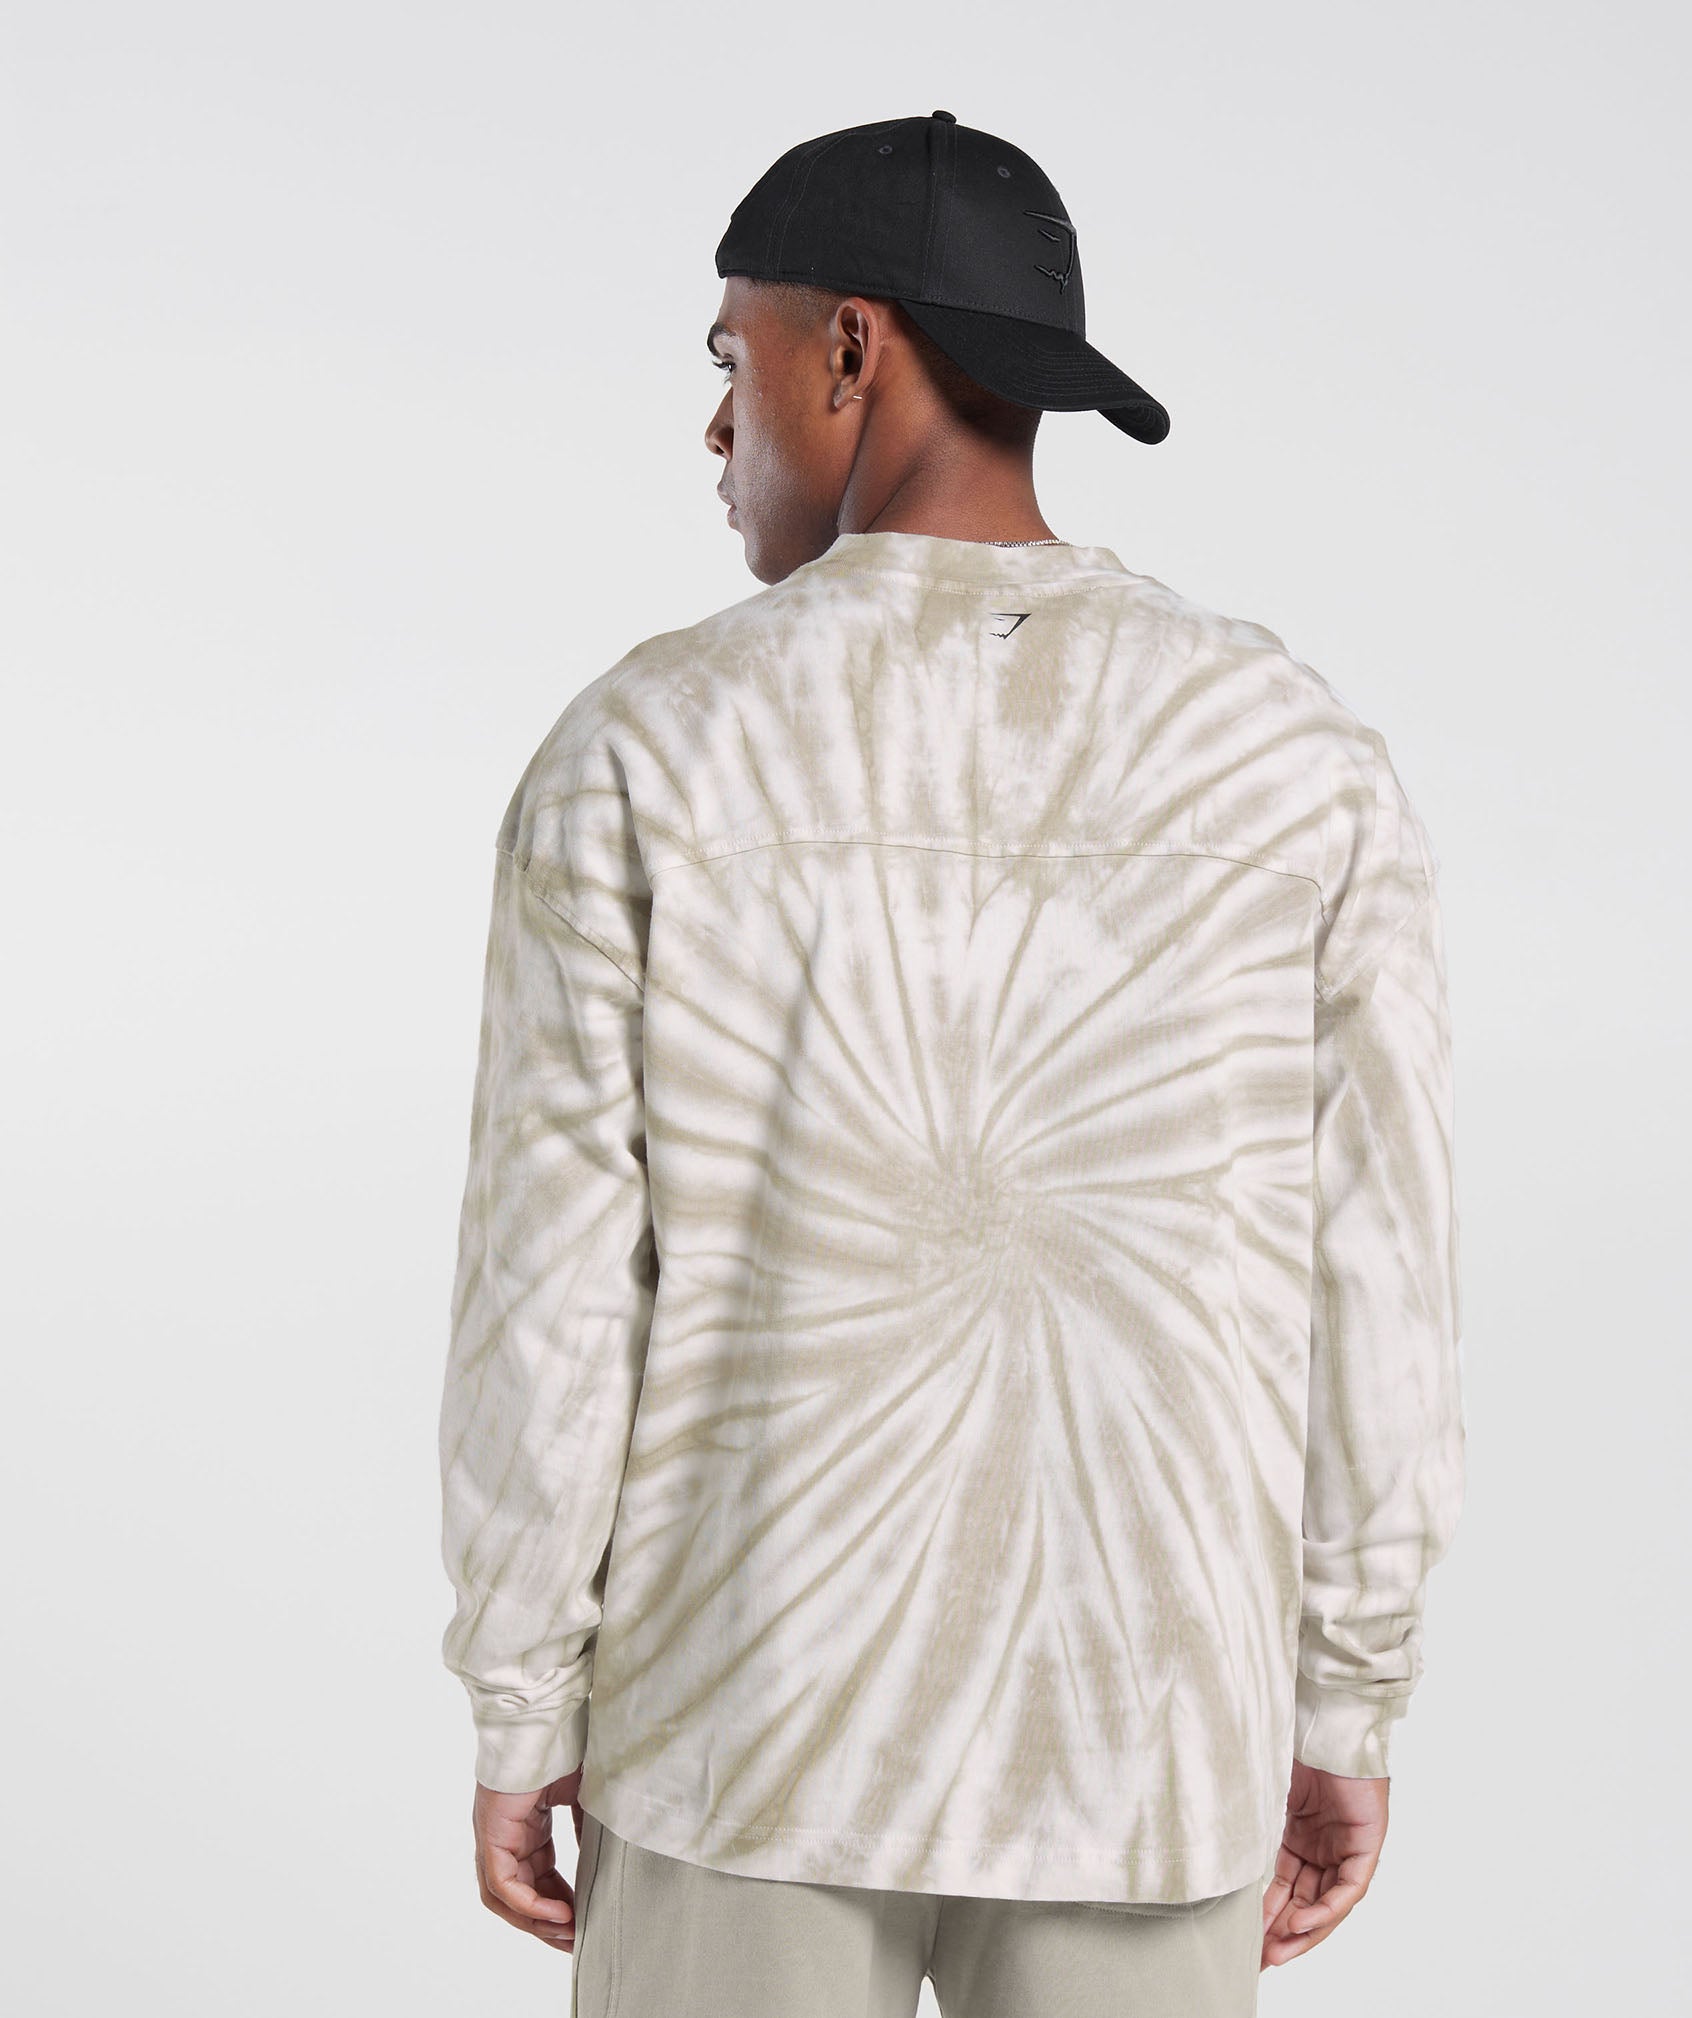 Rest Day Long Sleeve T-Shirt in White/Mushroom Brown/Spiral Optic Wash - view 2